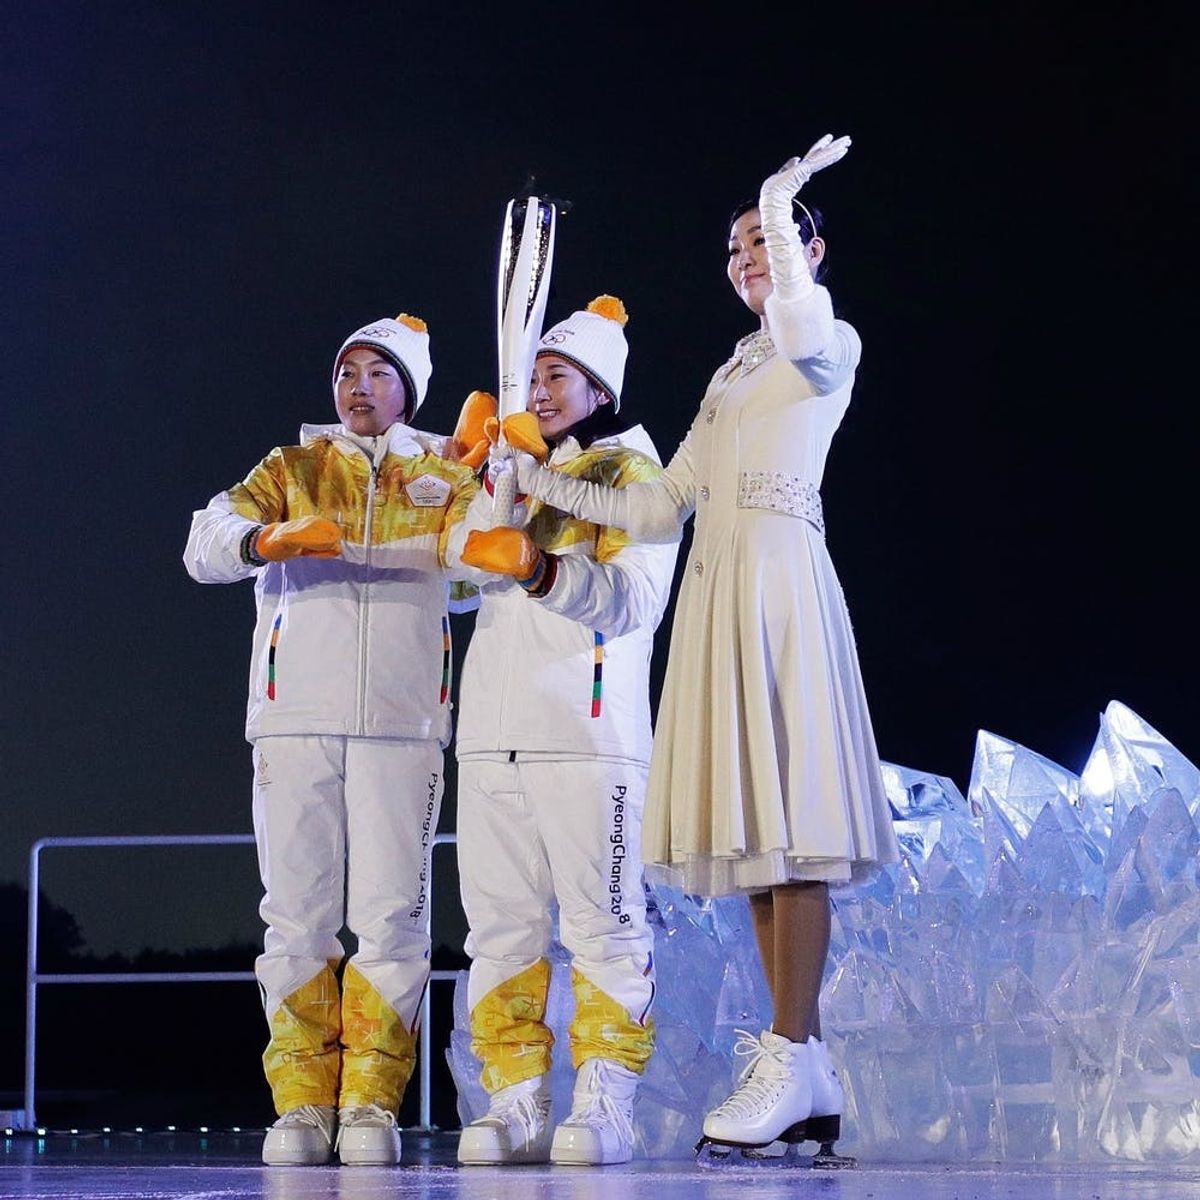 The Story Behind the Two Women Carrying the Olympic Torch Together Will Warm Your Heart